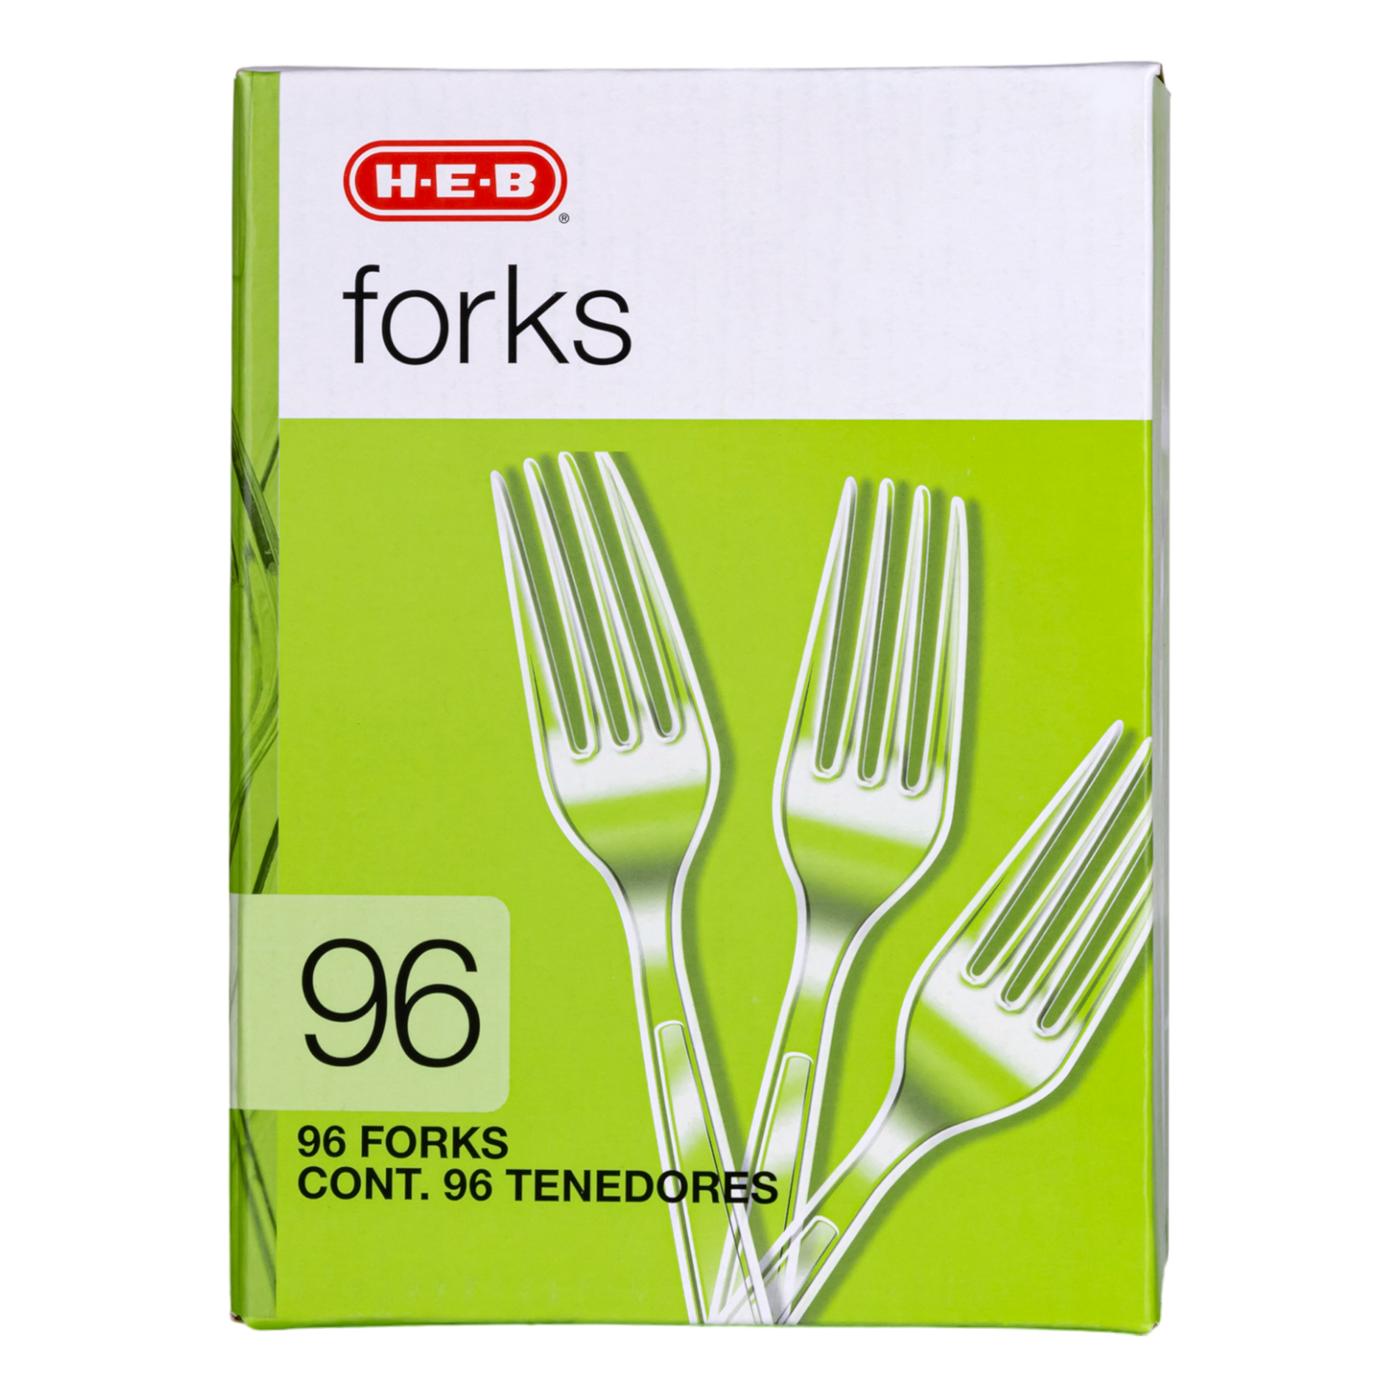 H-E-B Plastic Forks - Clear; image 1 of 5